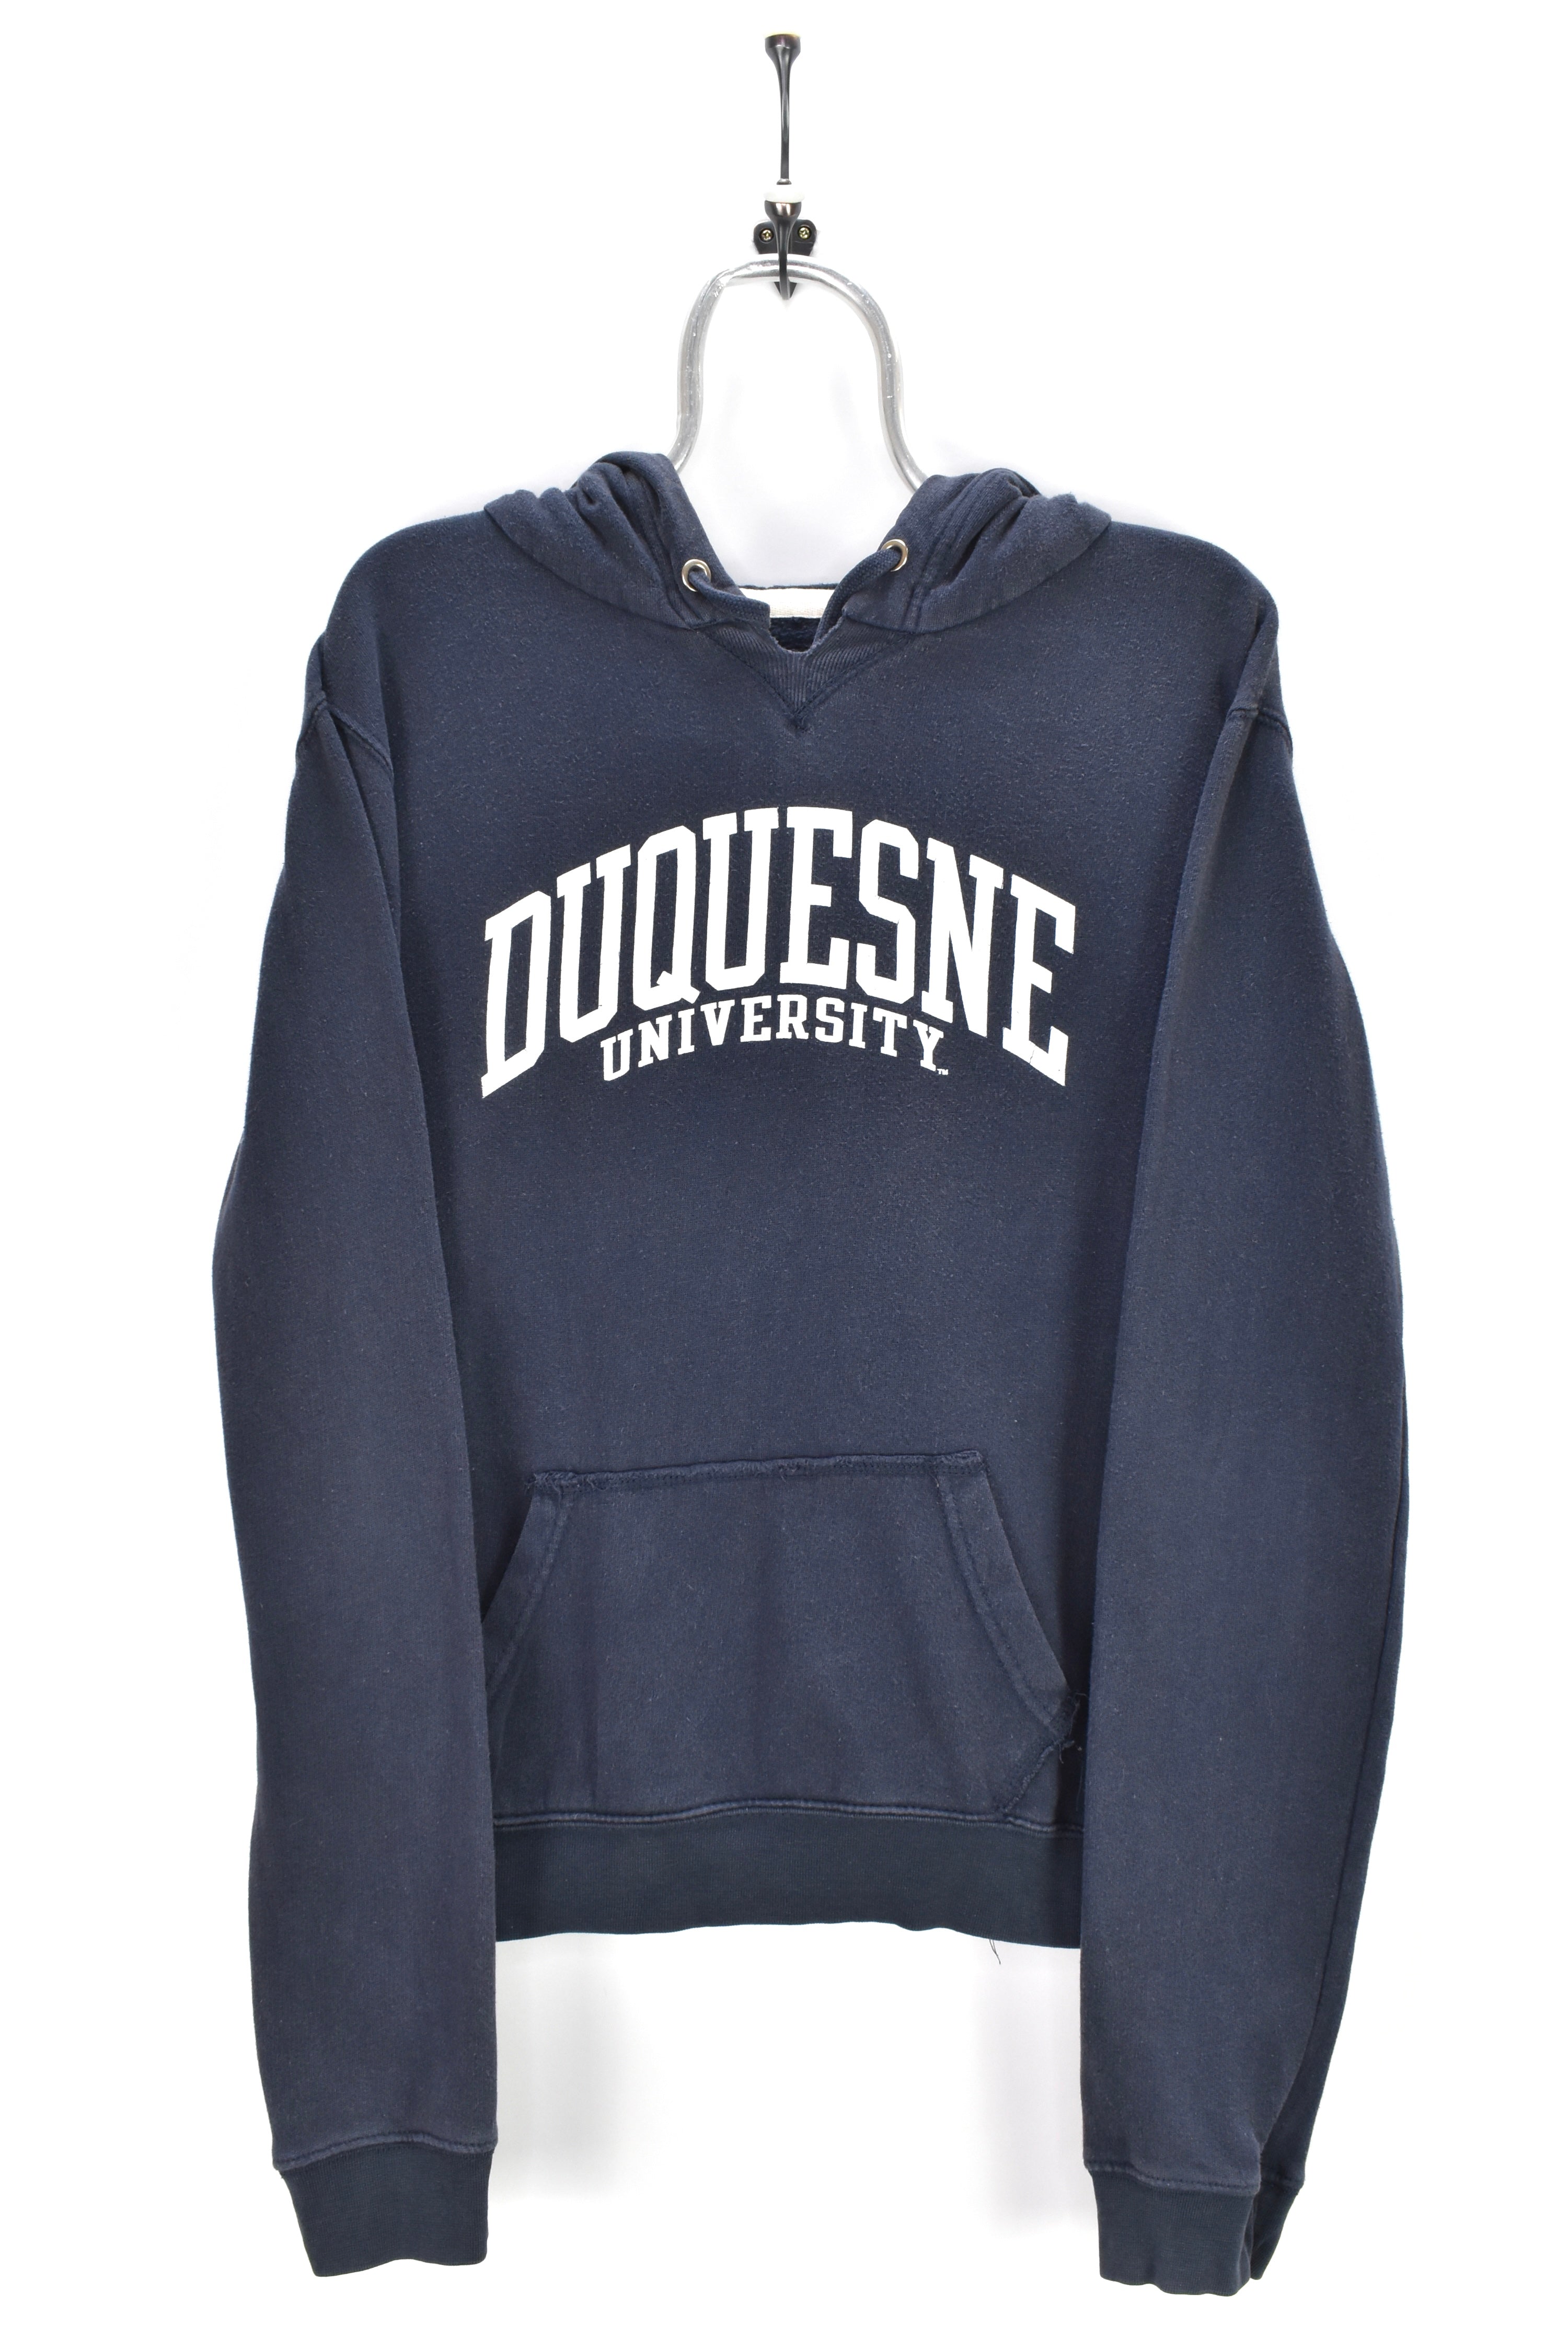 MODERN DUQUESNE UNIVERSITY NAVY HOODIE | SMALL COLLEGE